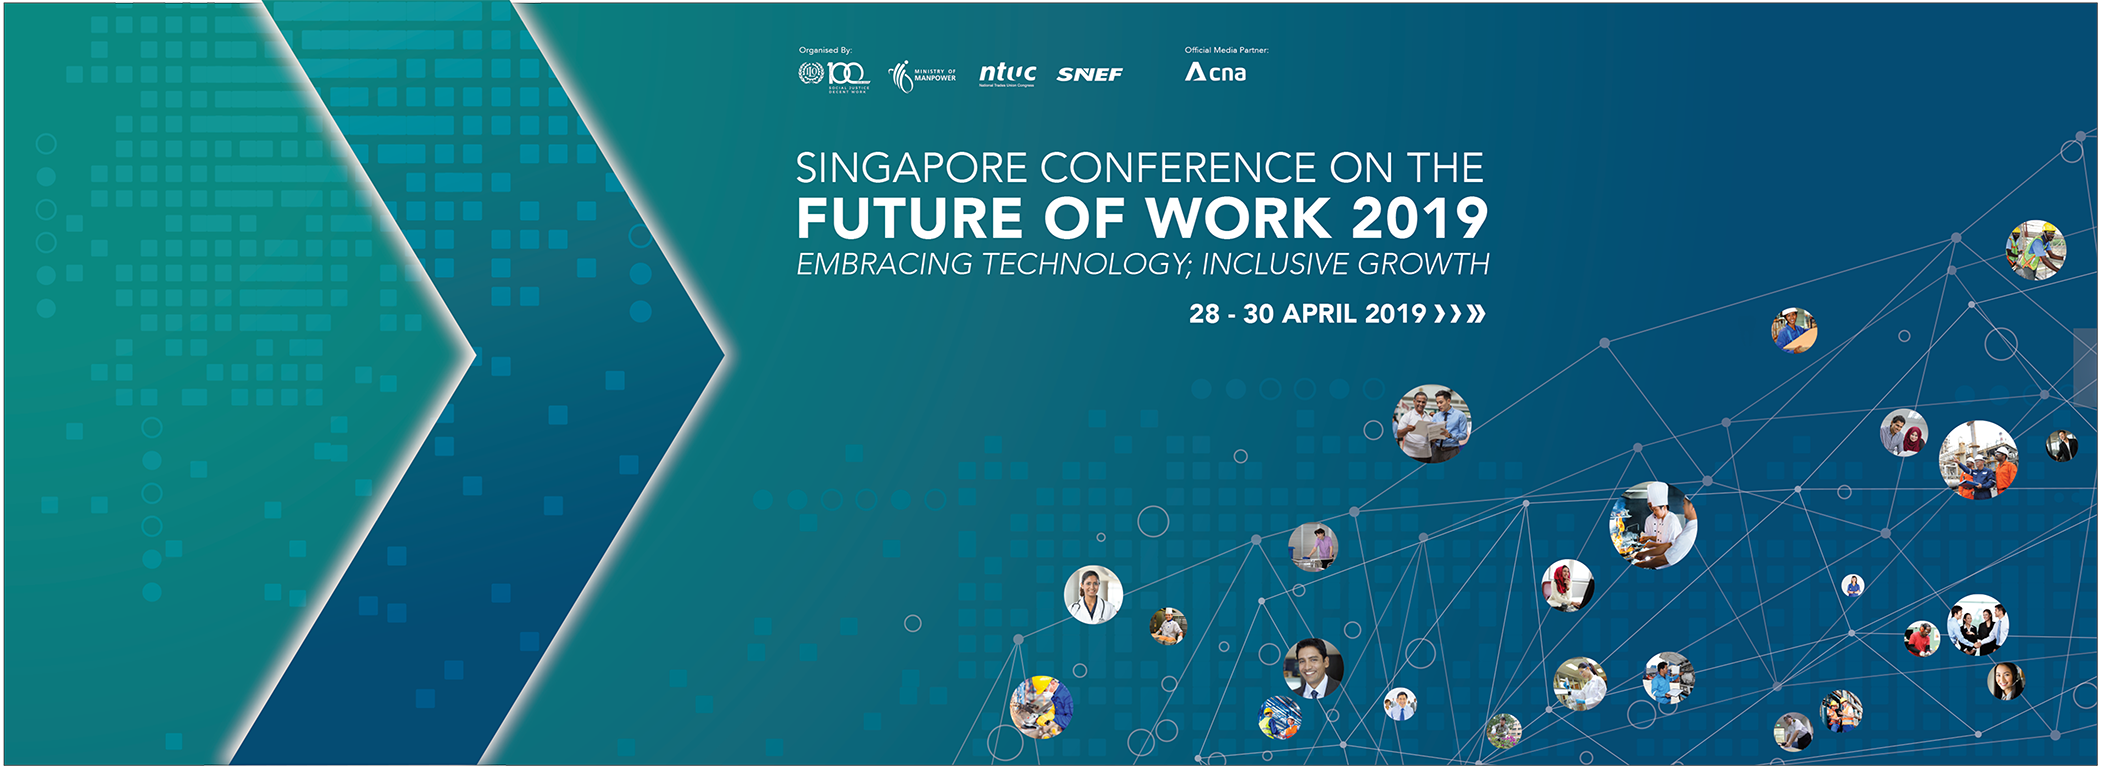 Singapore Conference on the Future of Work, 29 April 2019